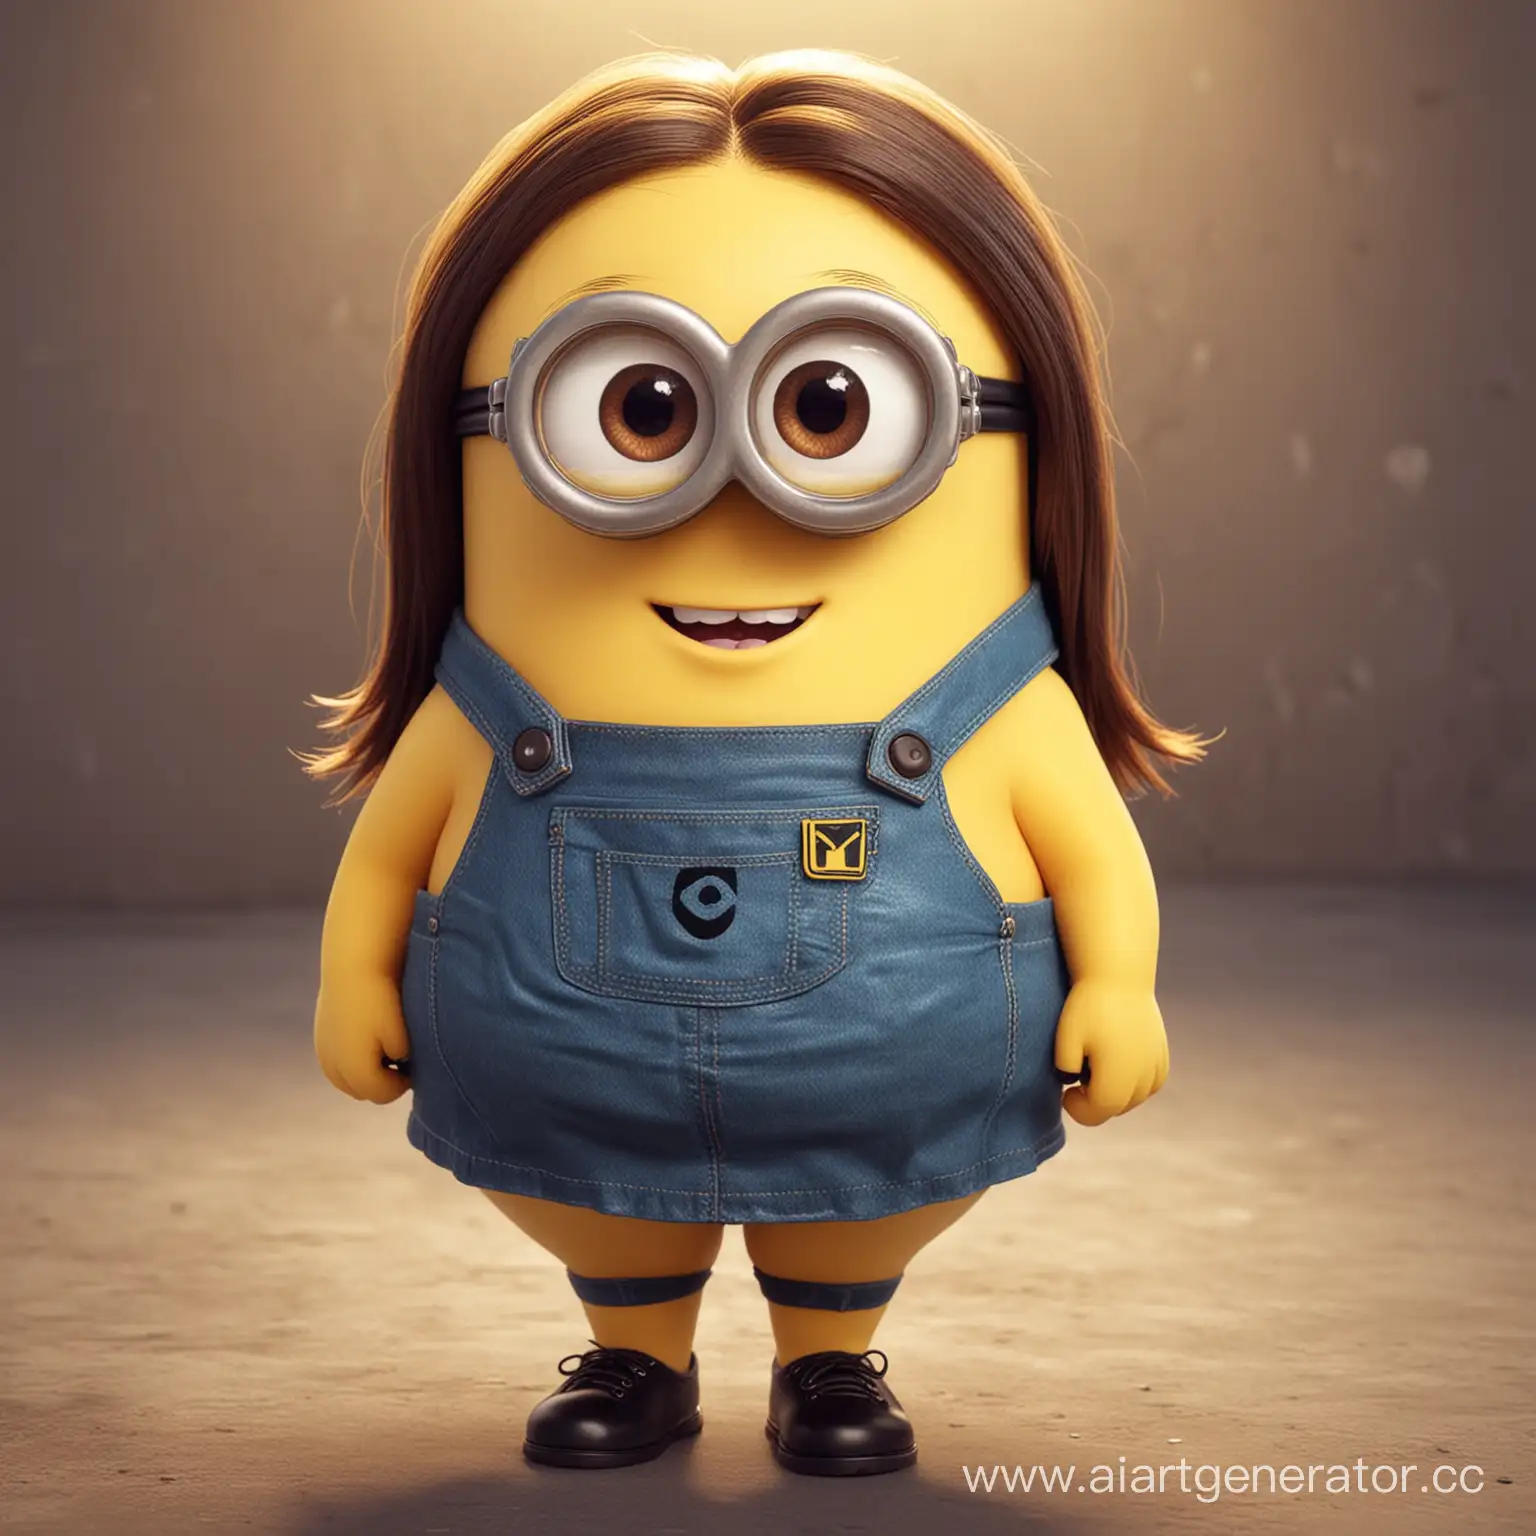 Cheerful-Chubby-Minion-Girl-with-a-Playful-Smile